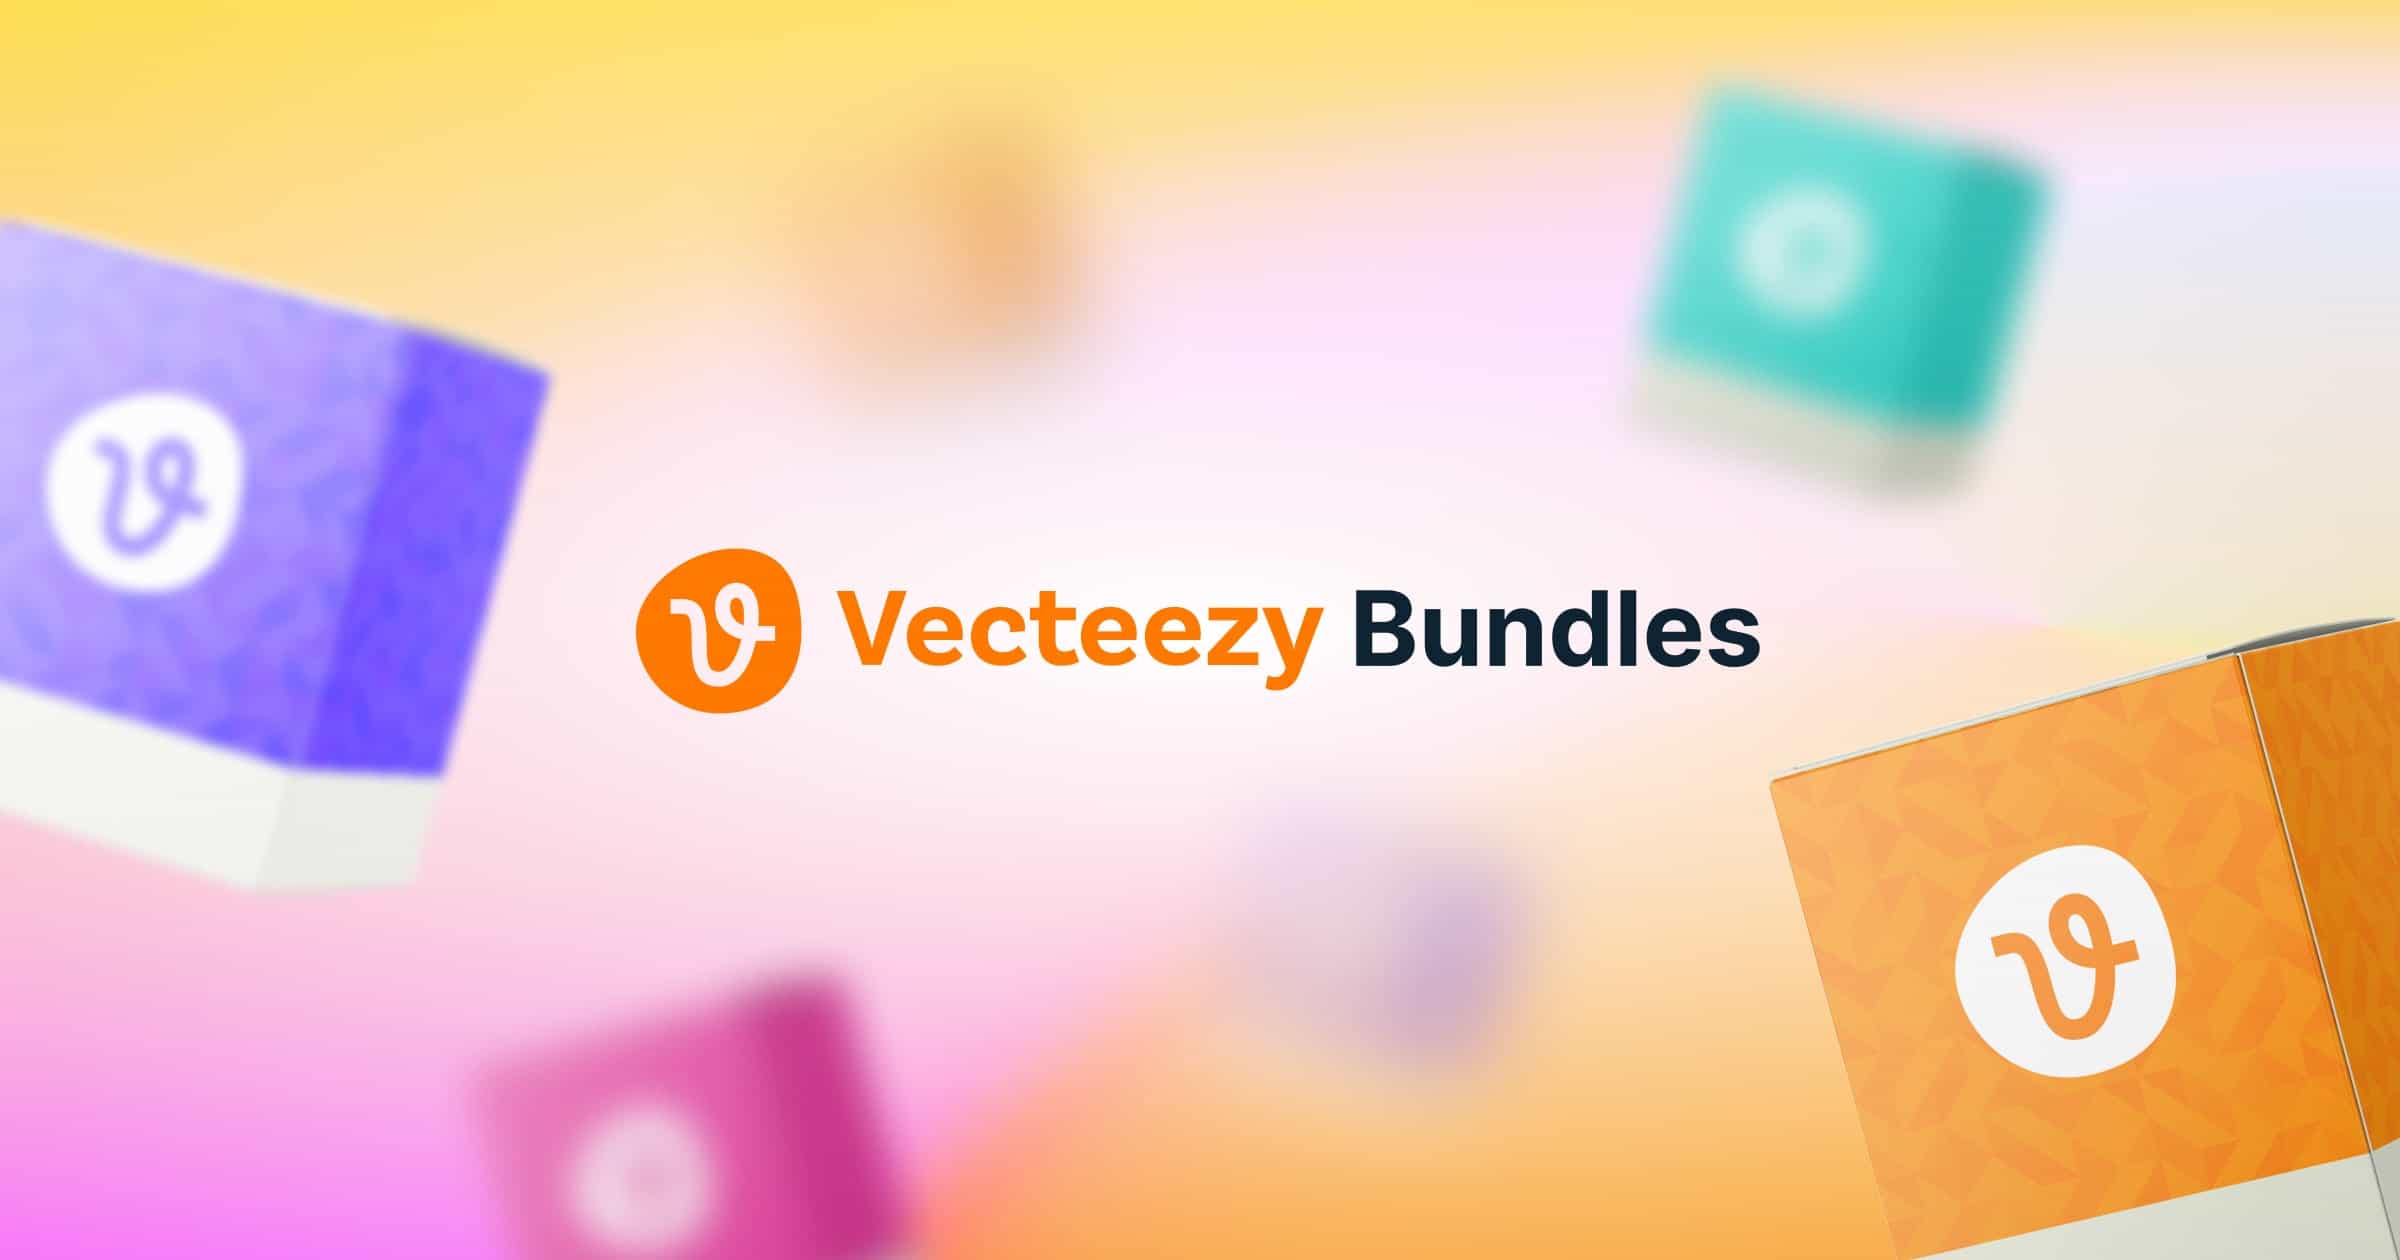 Vecteezy Design Bundles - See What's Launched!